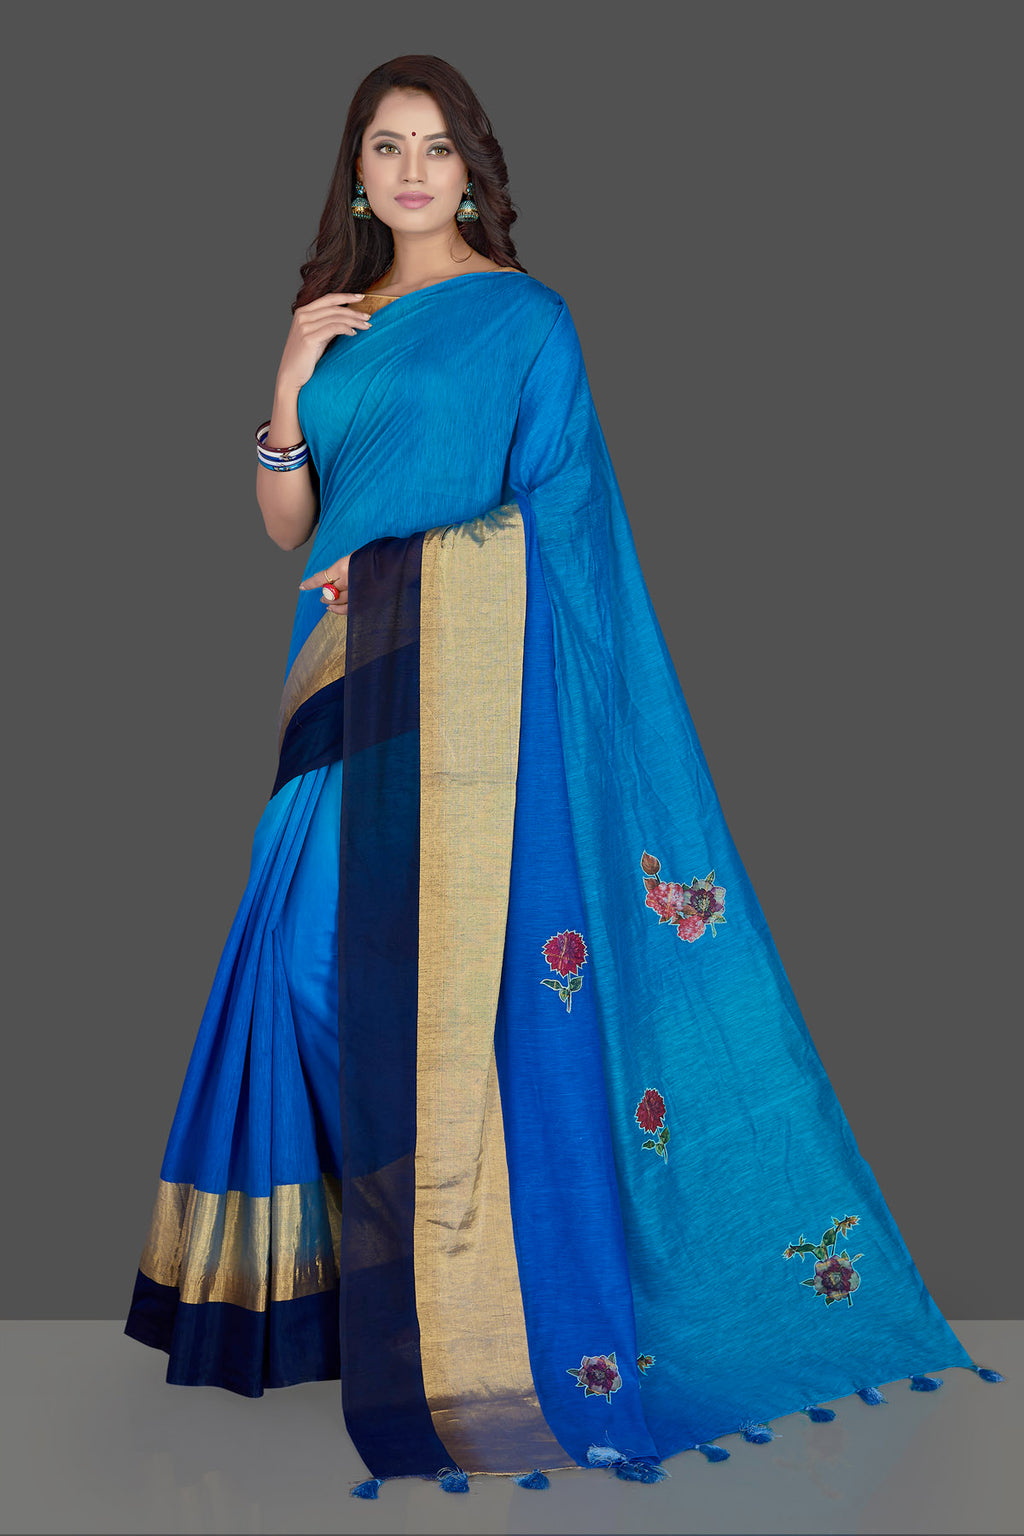 Shop charming blue floral applique linen sari online in USA with powder blue floral saree blouse. Radiate elegance with designer sarees with blouse, linen sarees from Pure Elegance Indian fashion boutique in USA. We bring a especially curated collection of ethnic saris for Indian women in USA under one roof!-full view